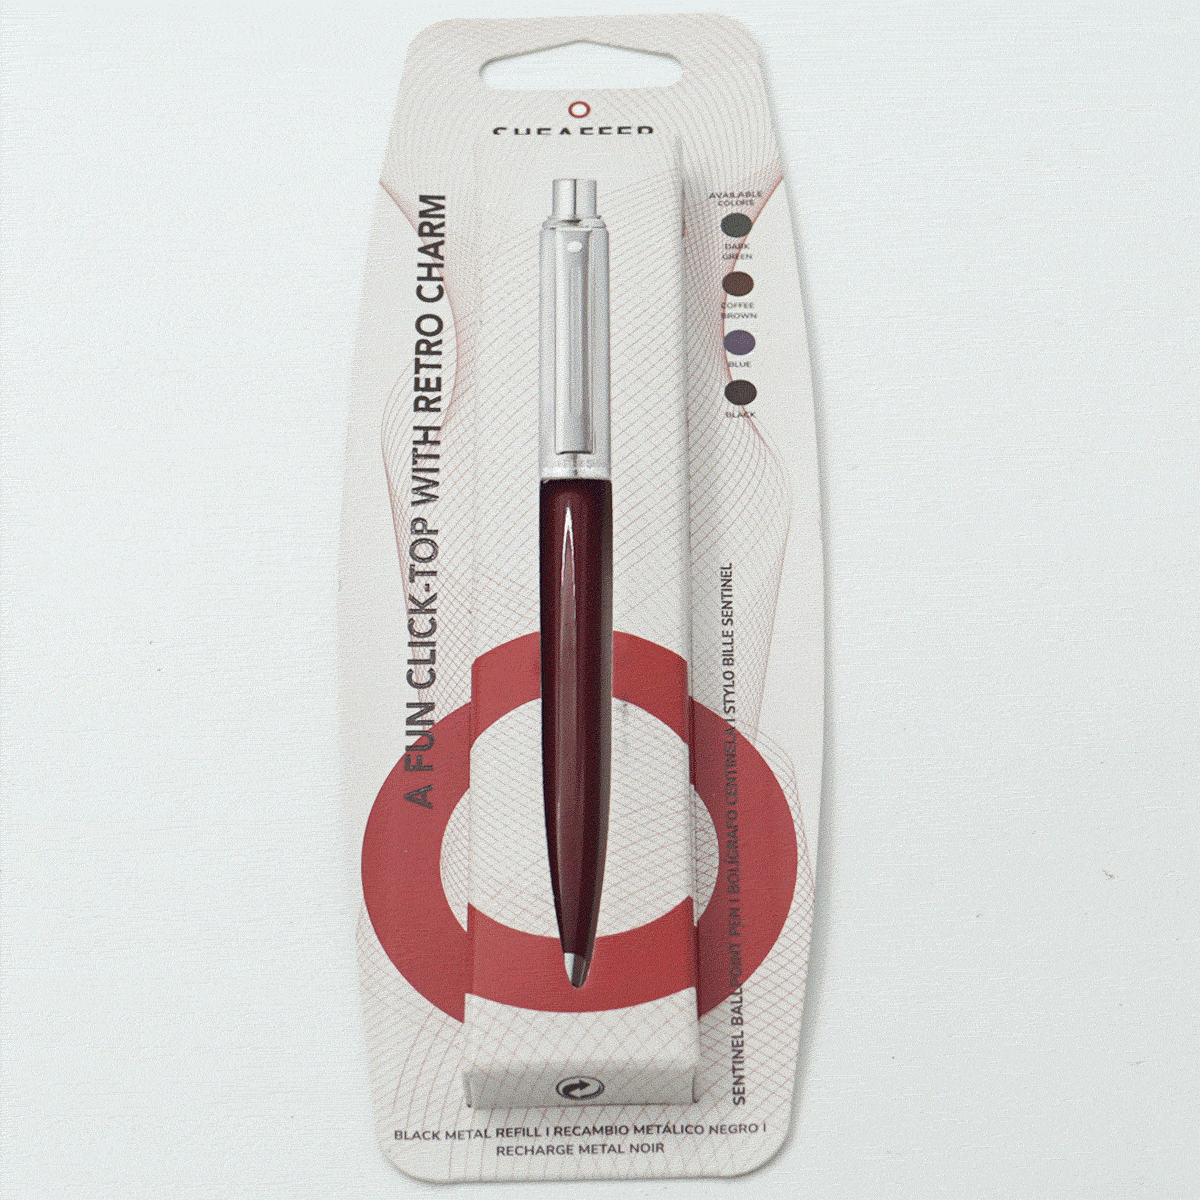 Sheaffer Sentinel Red Color Body With Silver Color Cap Medium Tip Retractable Type Ball Pen SKU 24161